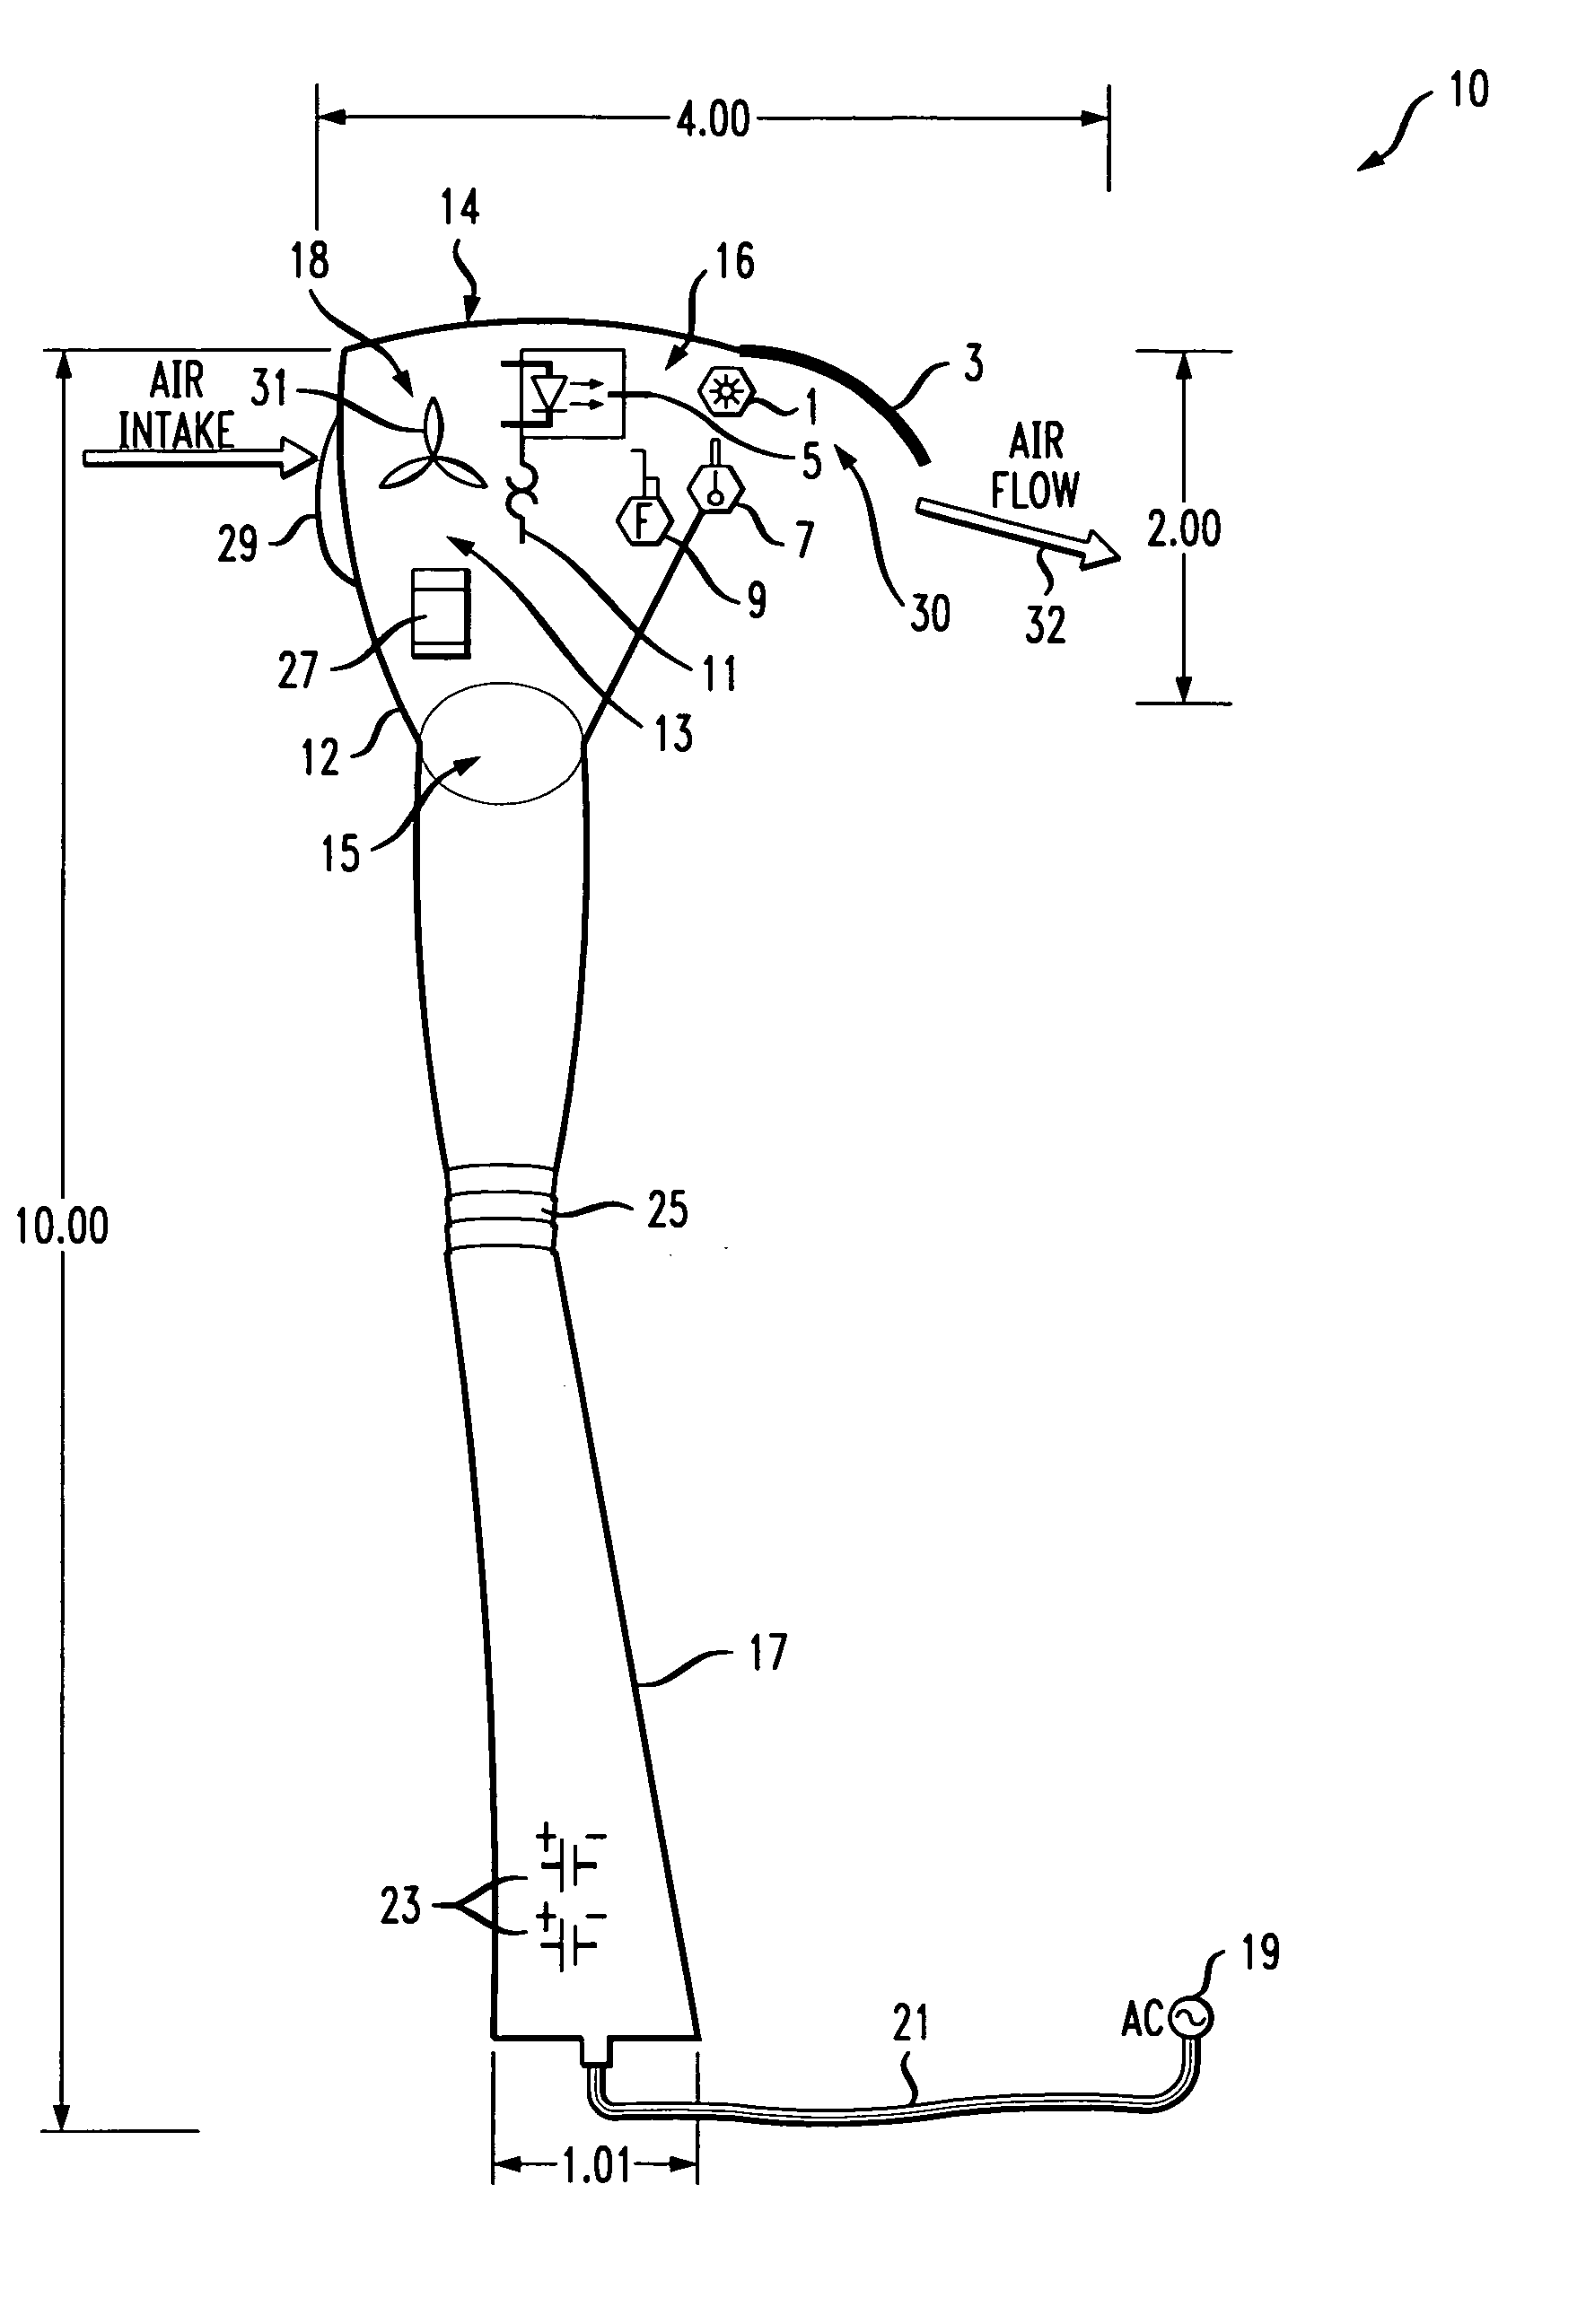 Therapeutic device for delivering controlled air stream flow and/or photodynamic light therapy